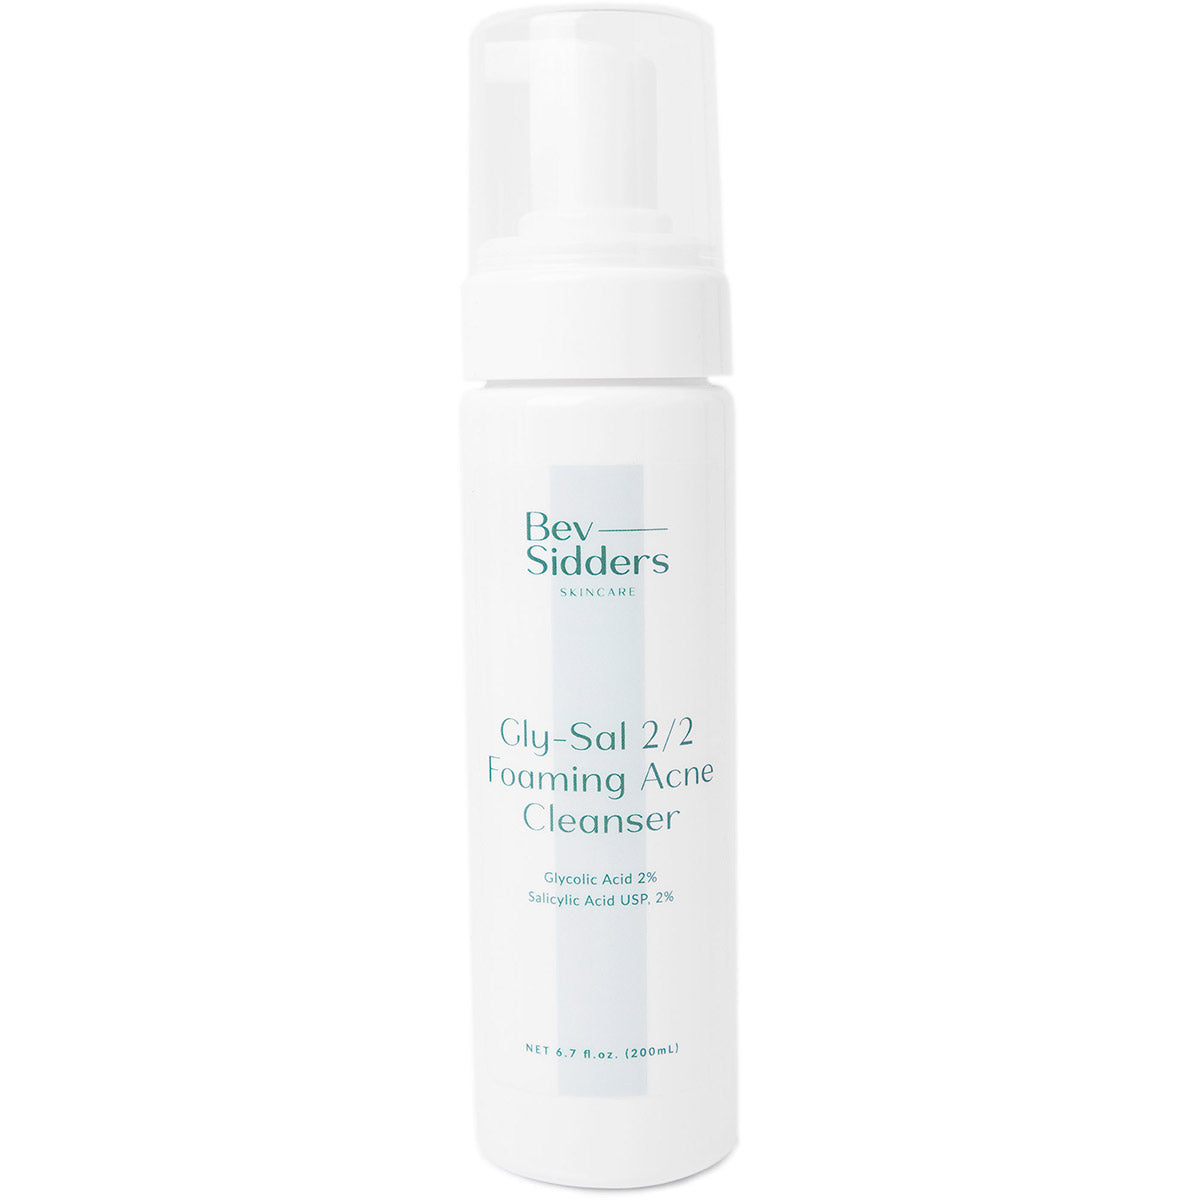 Load image into Gallery viewer, Gly-Sal 2 / 2 Foaming Acne Cleanser | Bev Sidders Skincare
